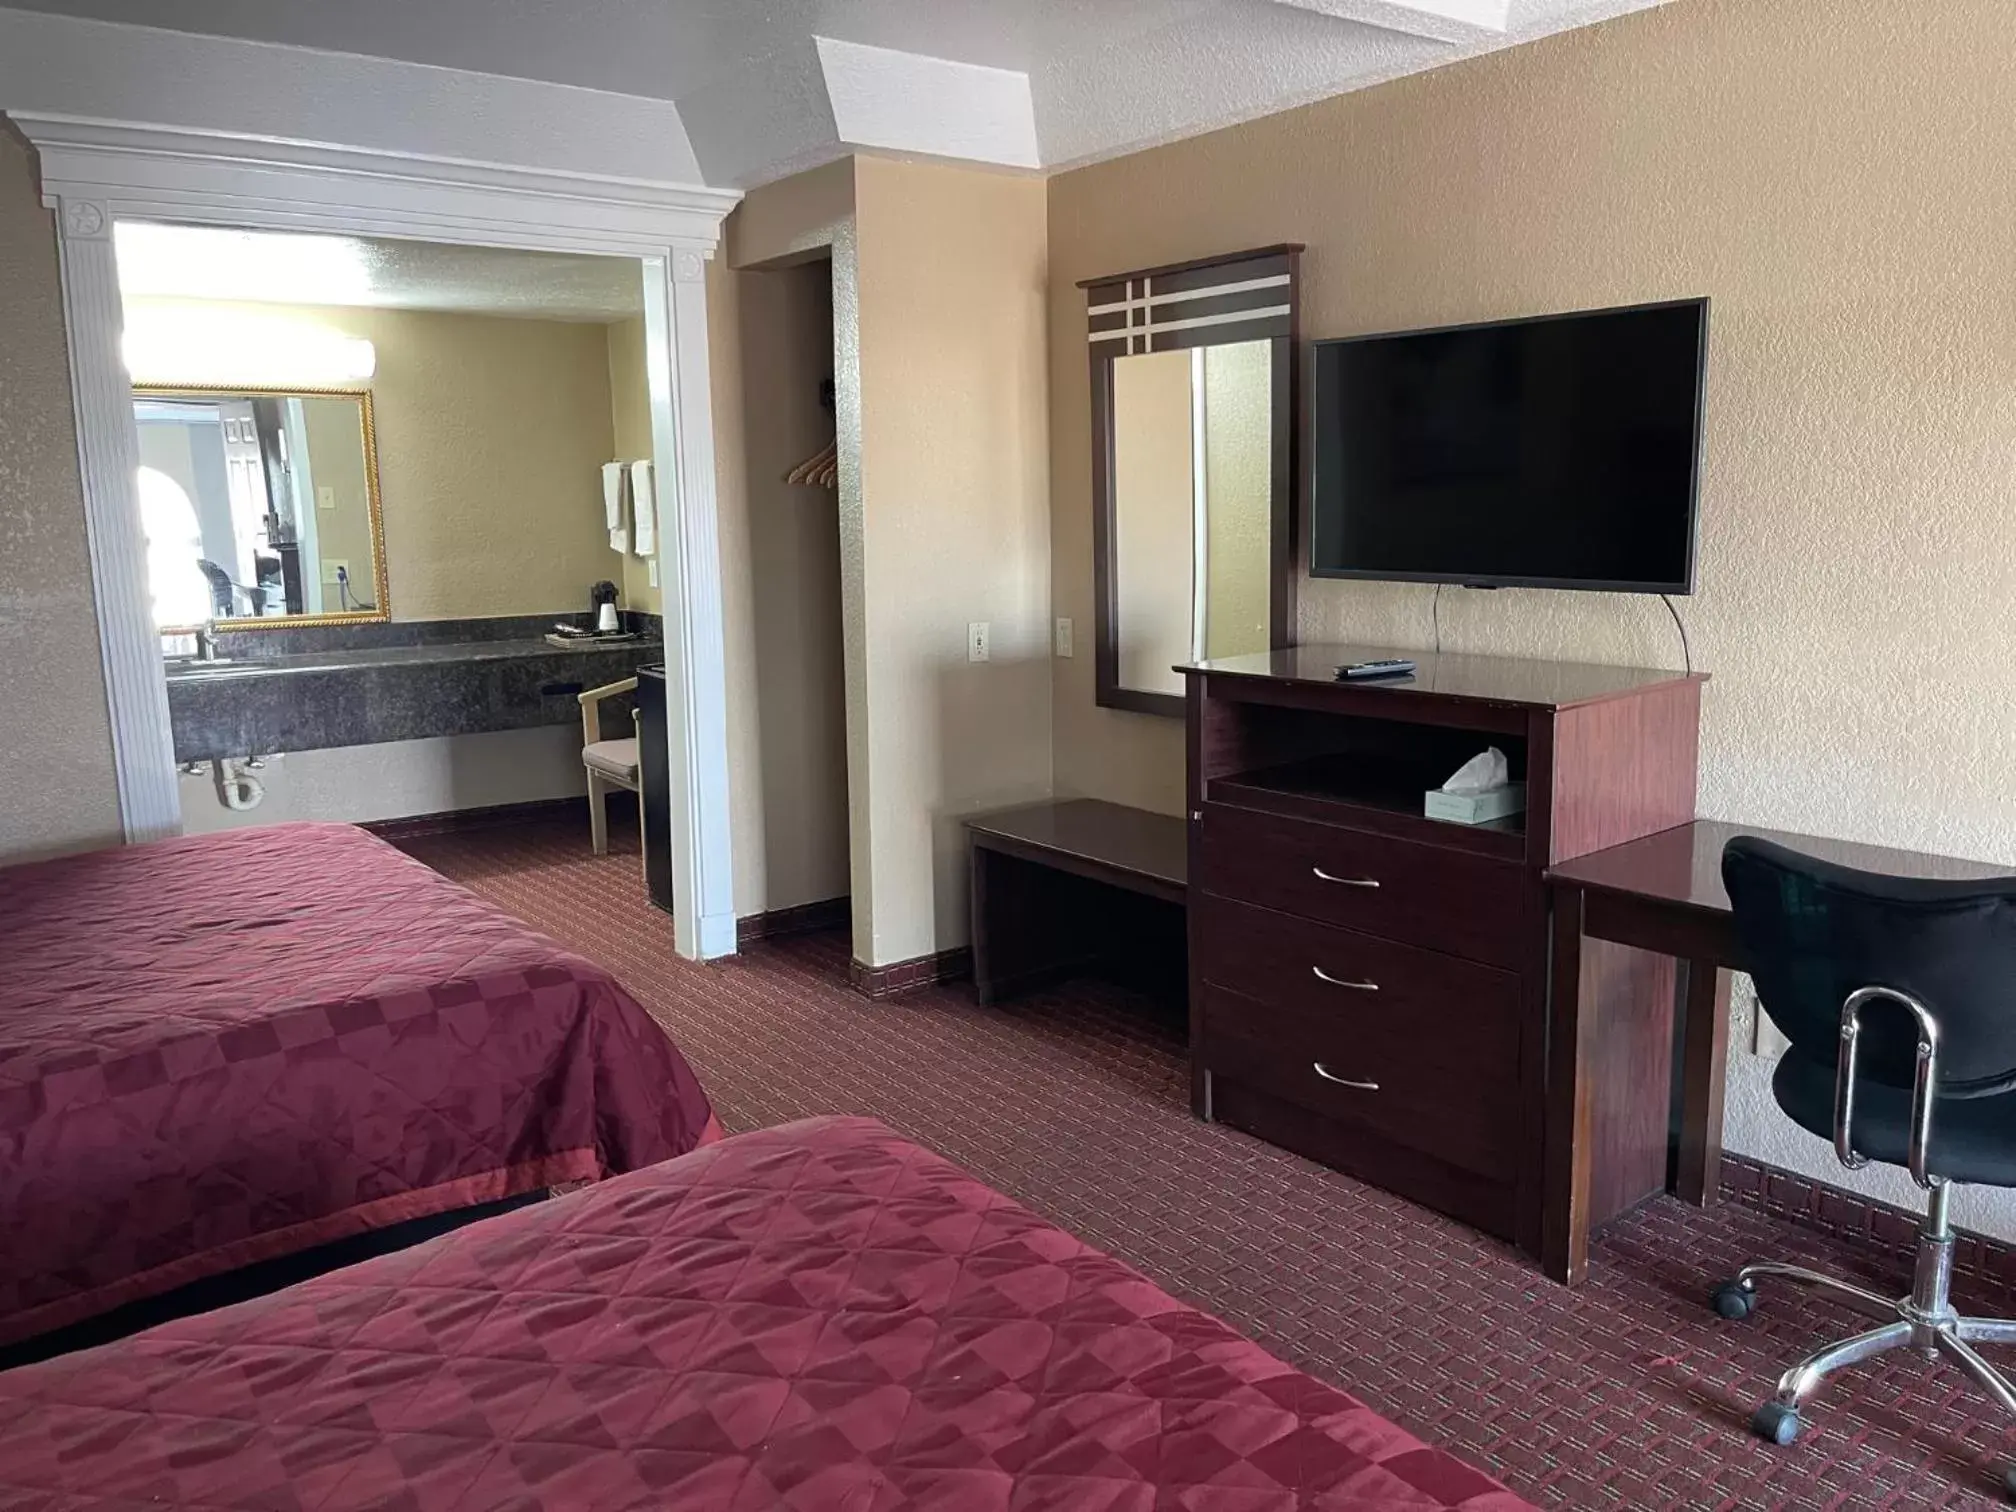 Bedroom, TV/Entertainment Center in Budget Inn and Suites Corpus Christi